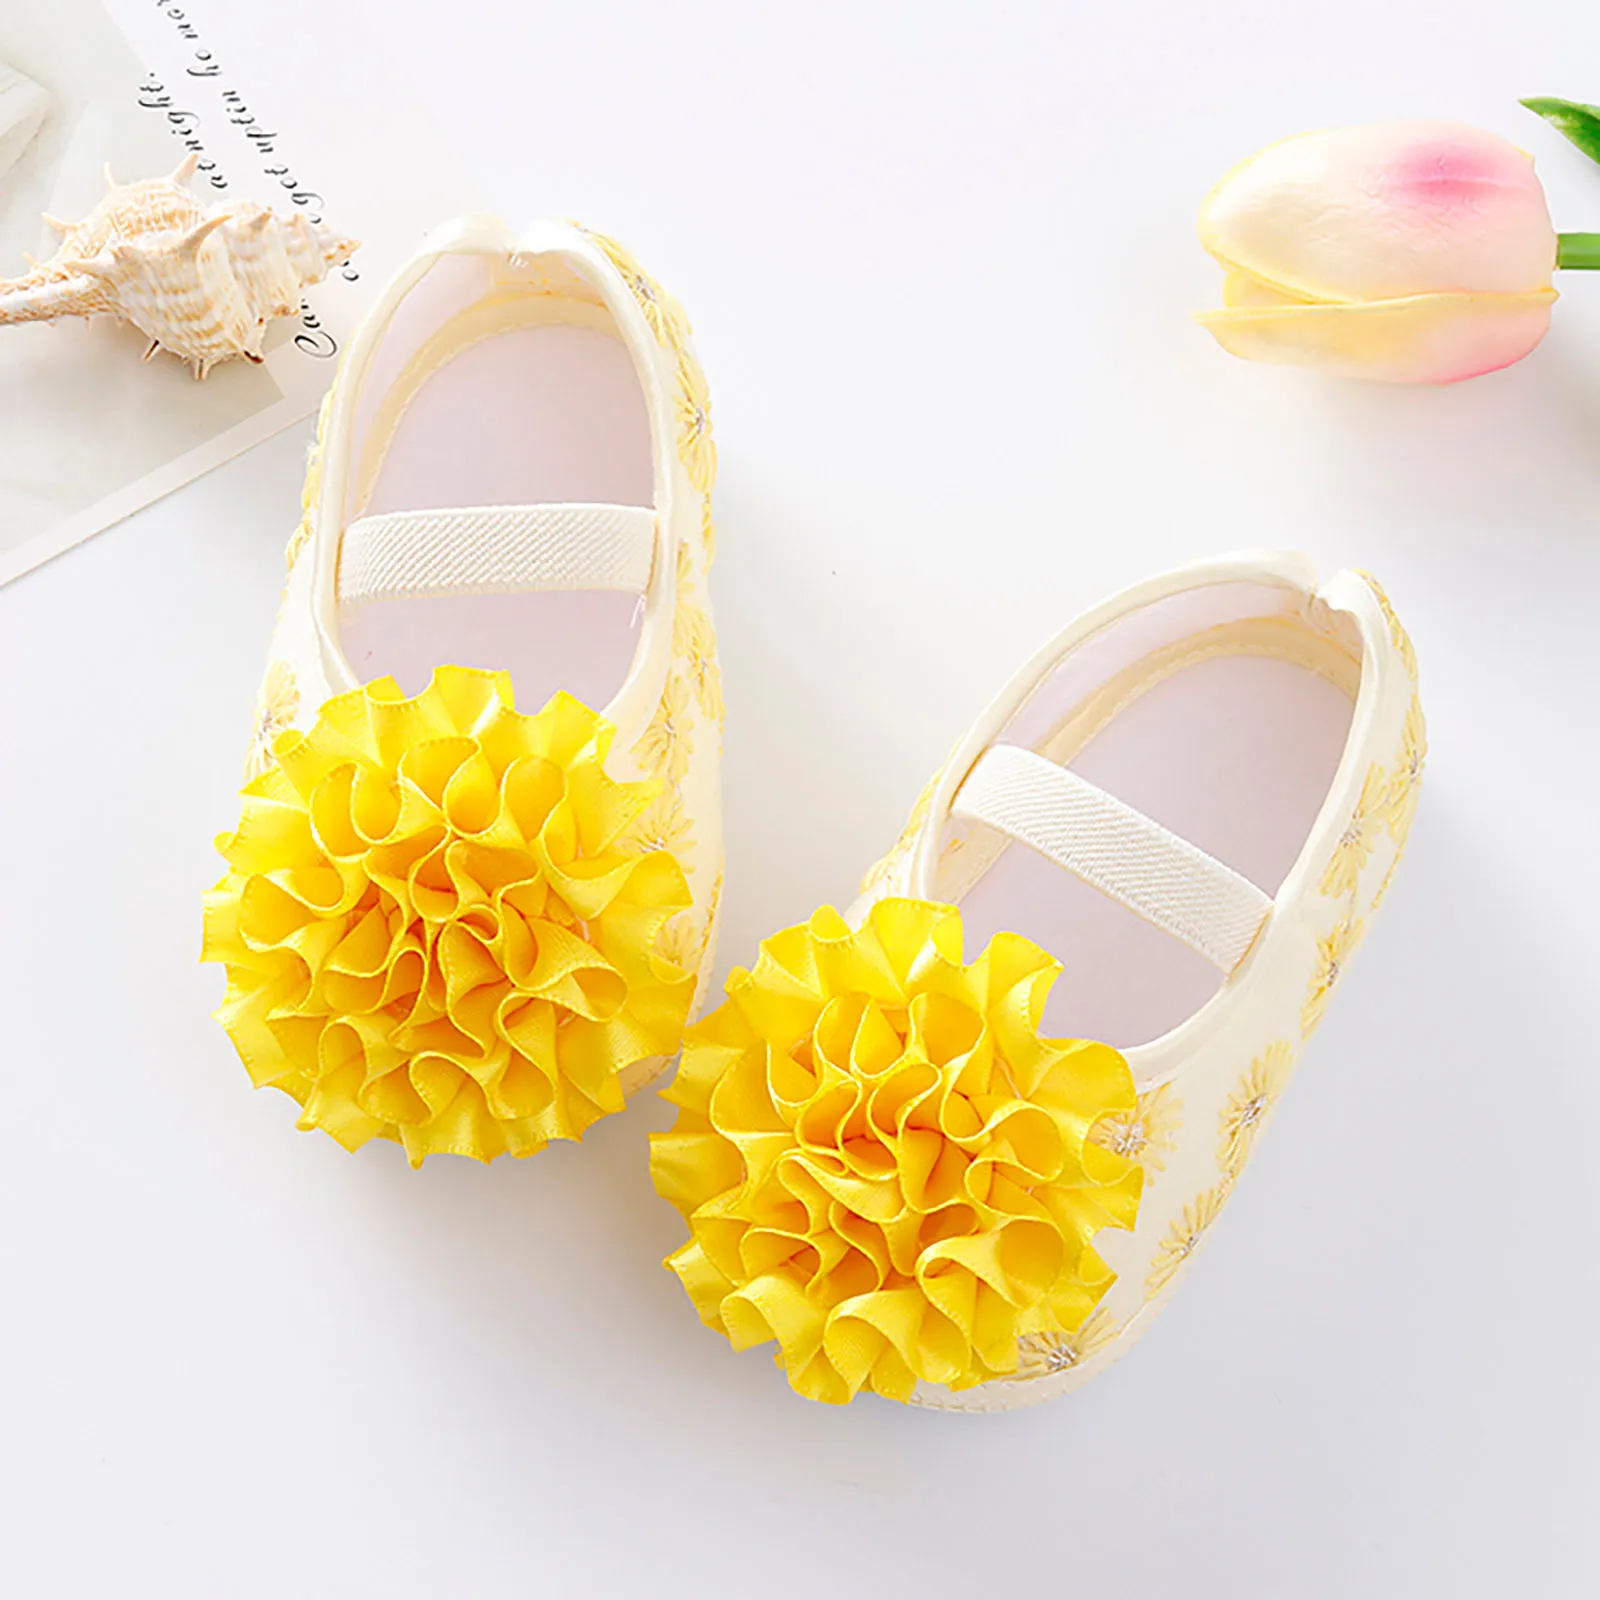 

Spring Infant Baby Girl Shoes Newborn Lace Flowers Headband Anti-Slip Soft Sole First Walkers Toddler Kids Cotton Baptism Shoes